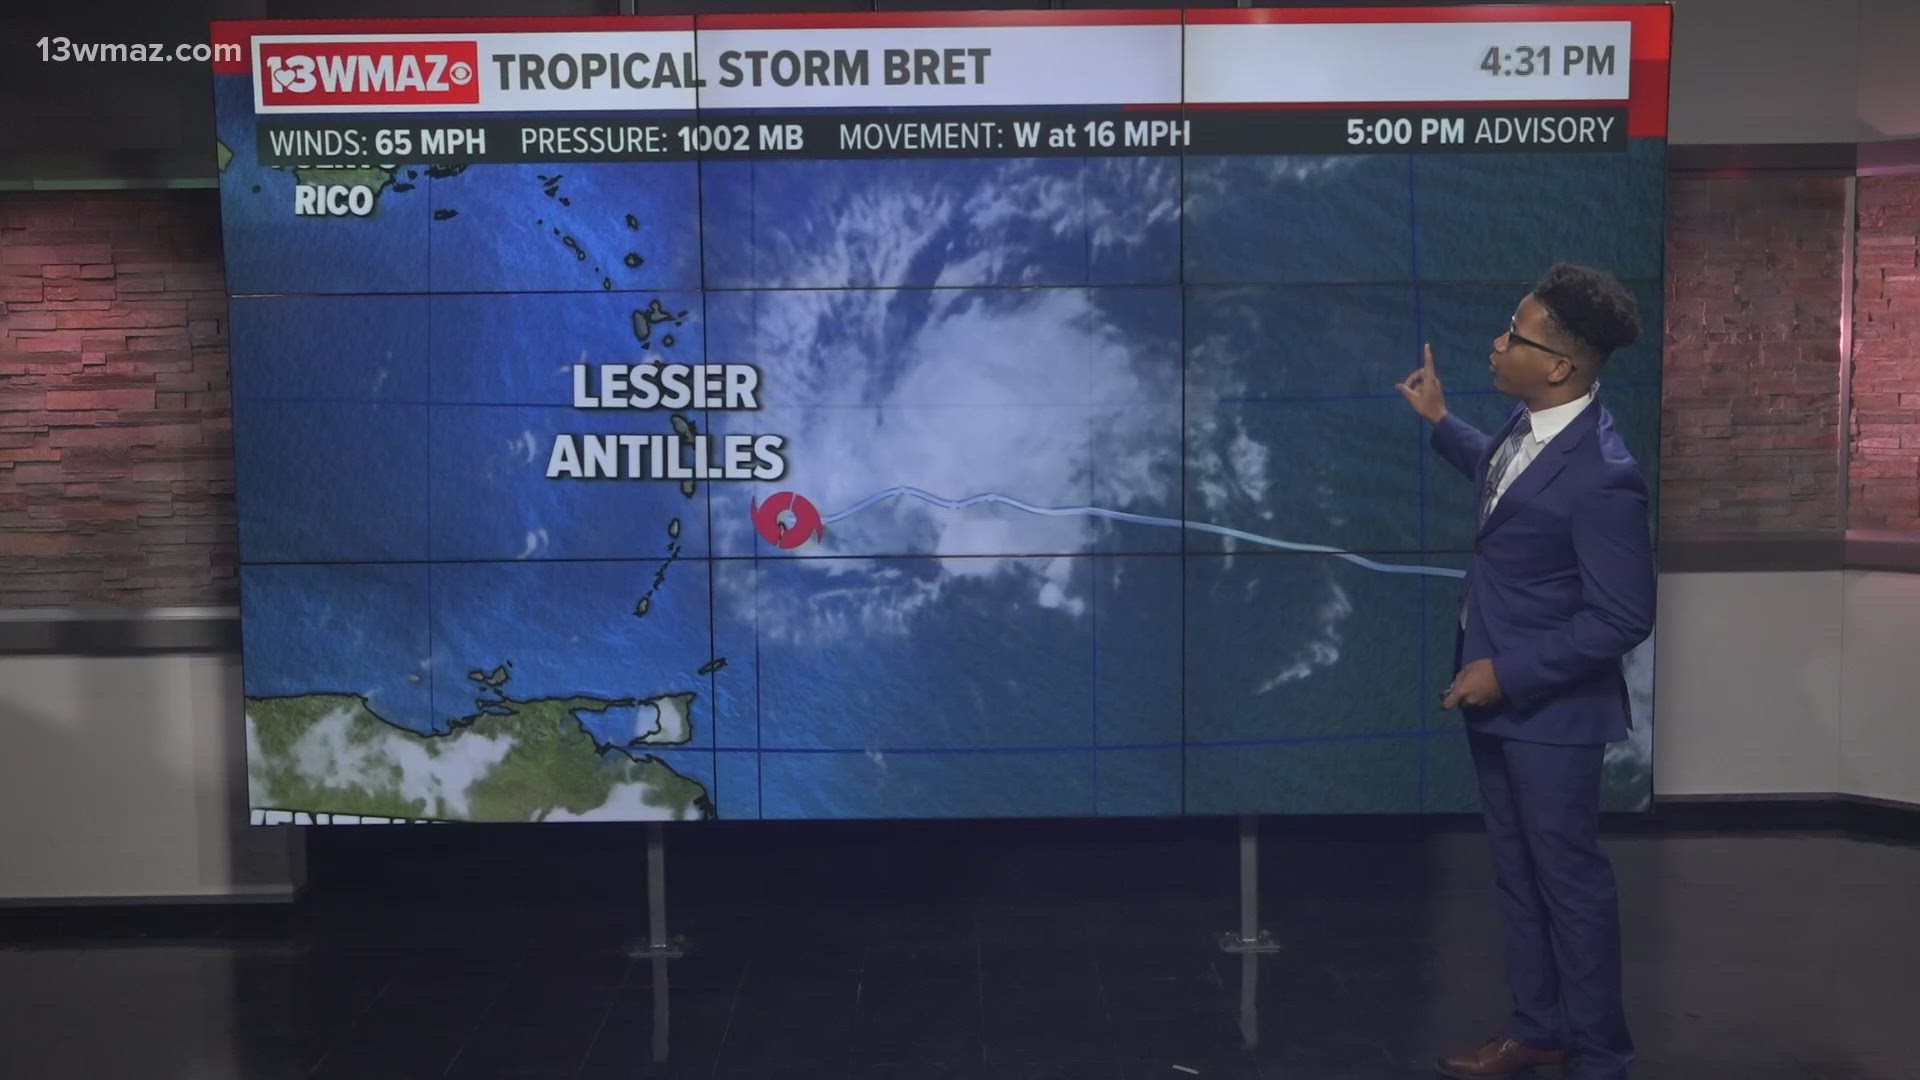 Meteorologist Jordan West has a look at what's going on out in the tropics!